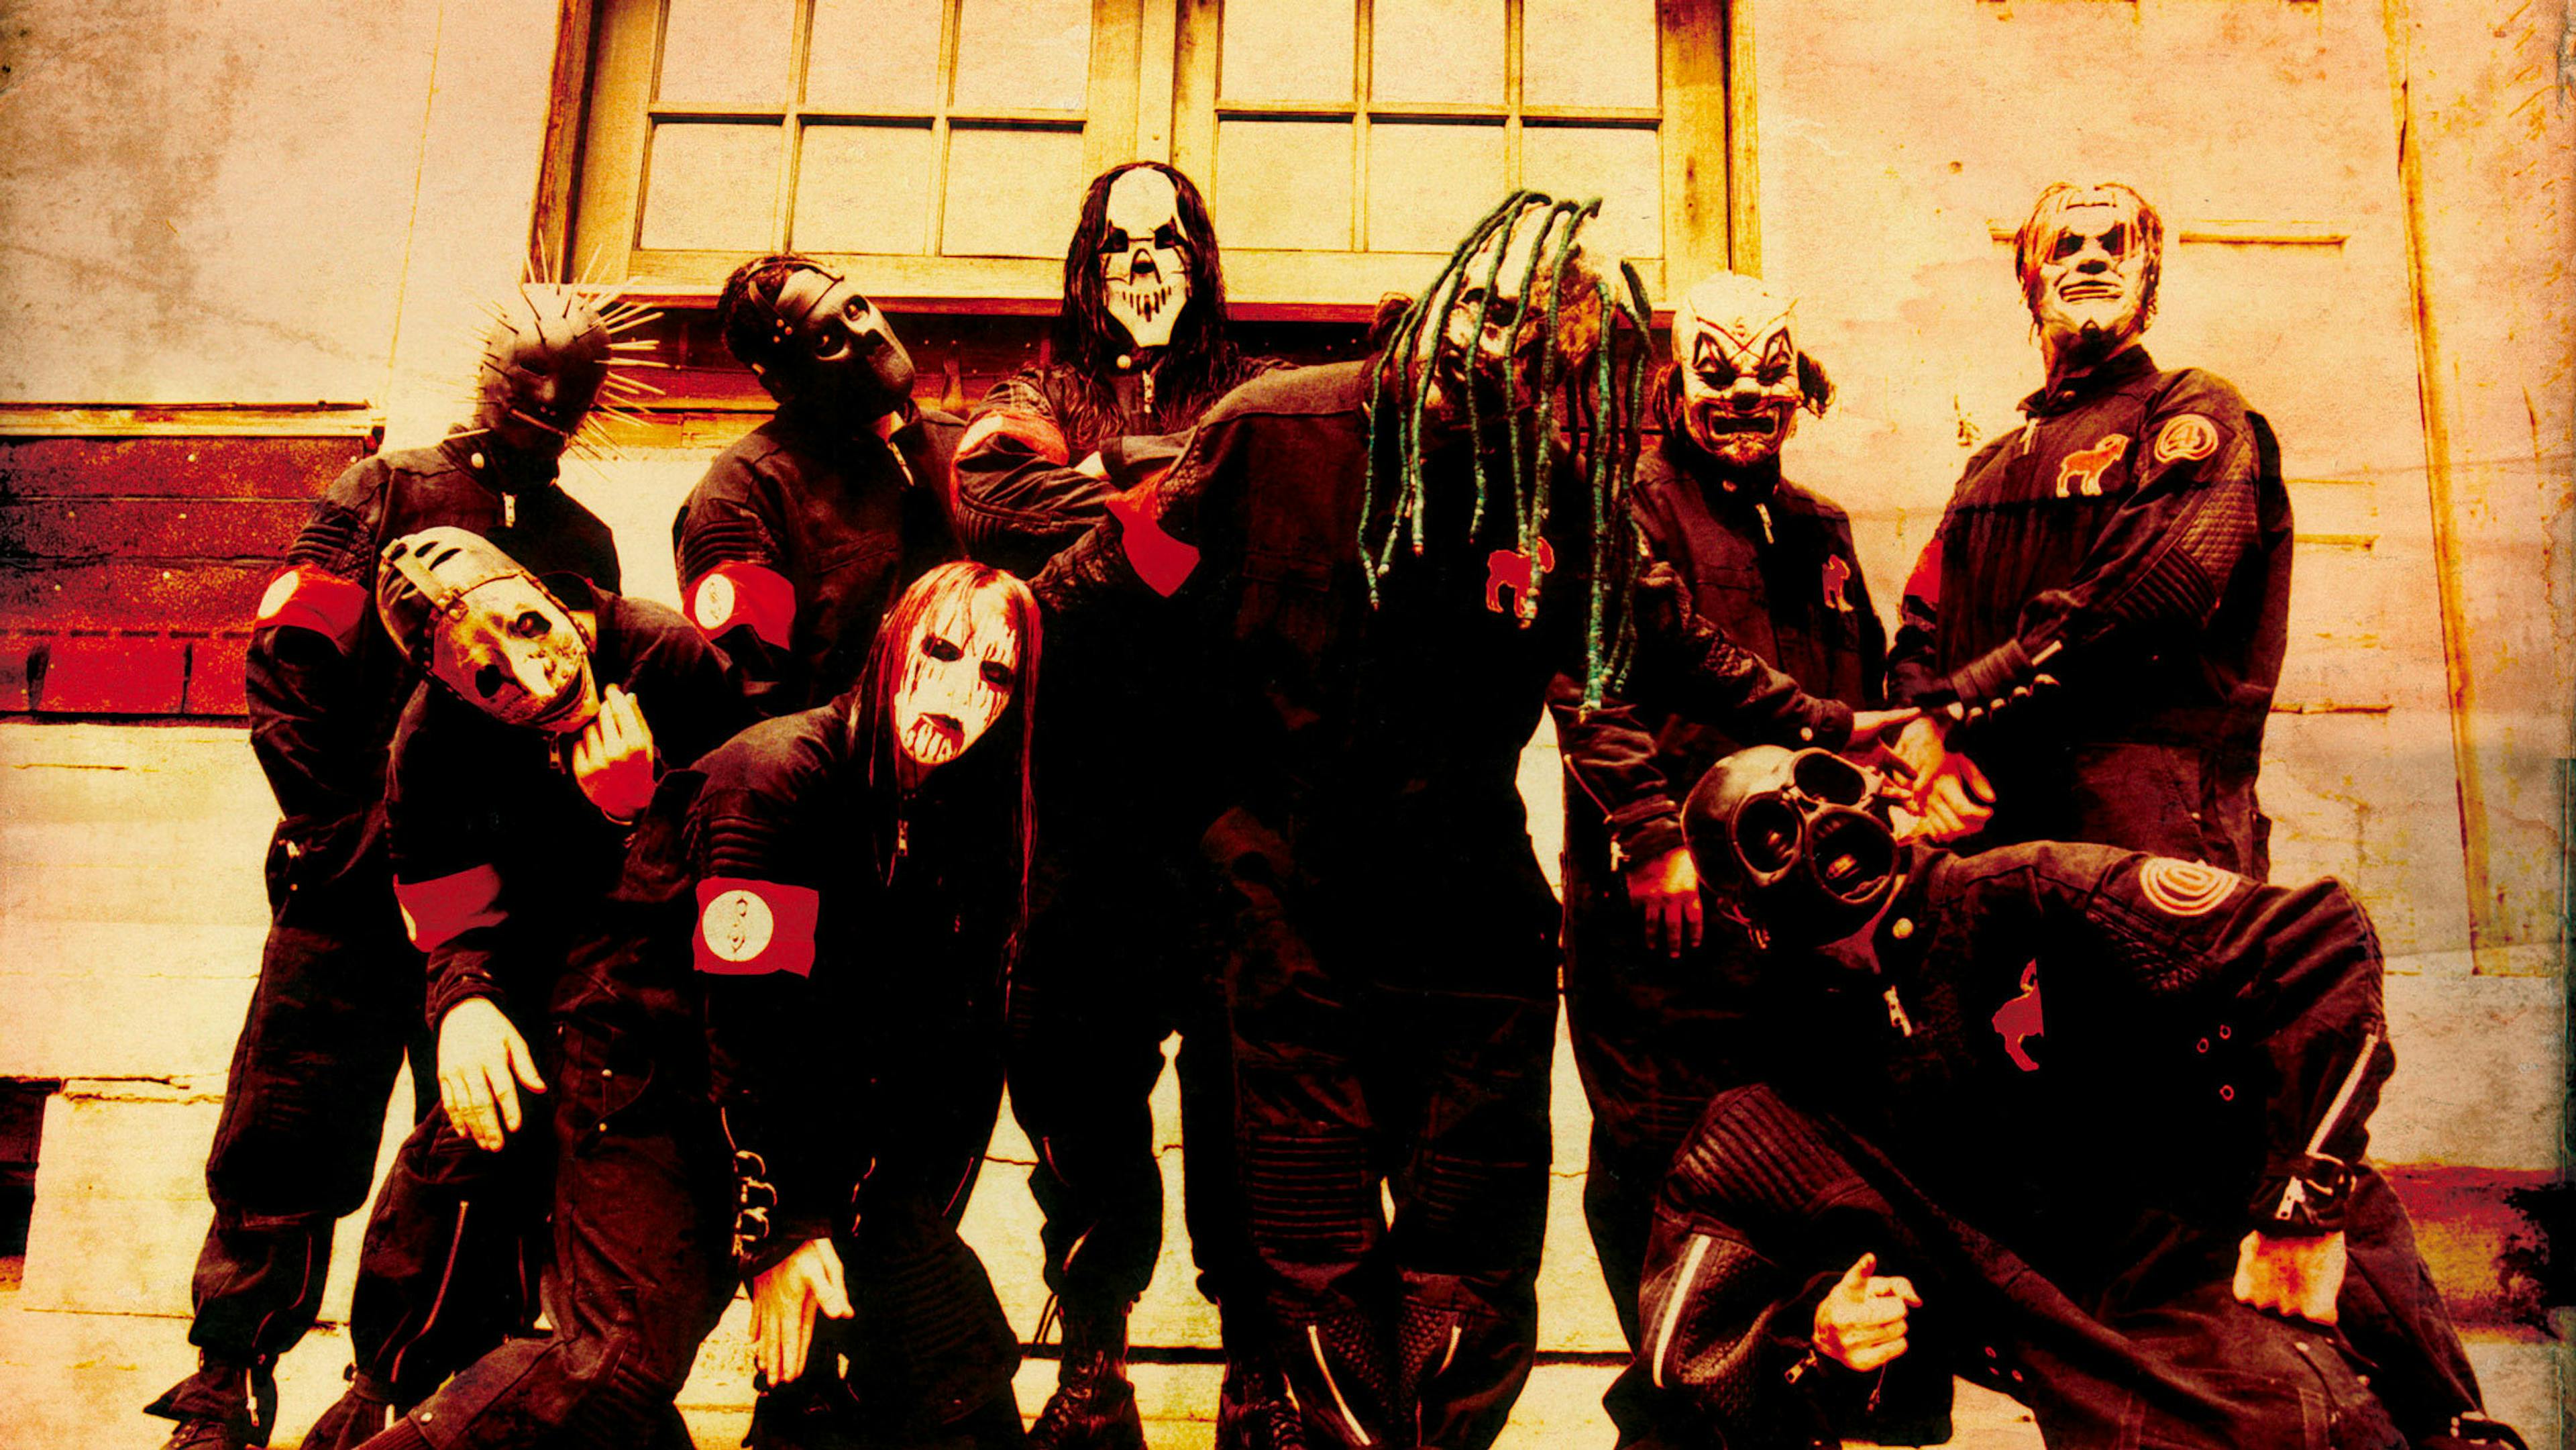 Slipknot: Corey Taylor shares old unmasked photo with Joey Jordison and Paul Gray